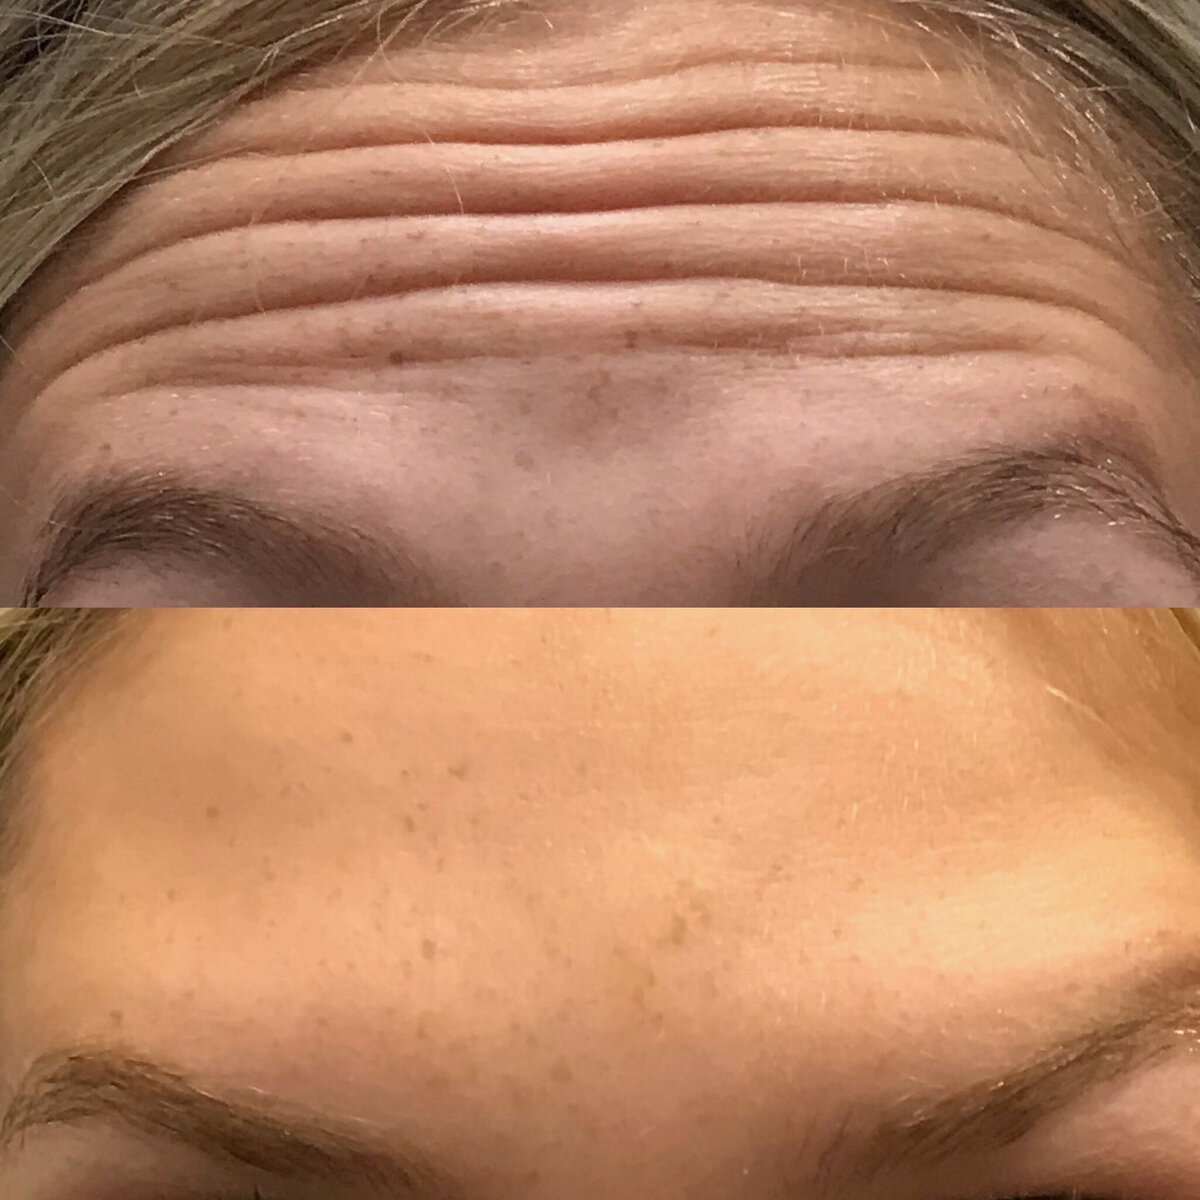 Forehead to filler to remove wrinkles